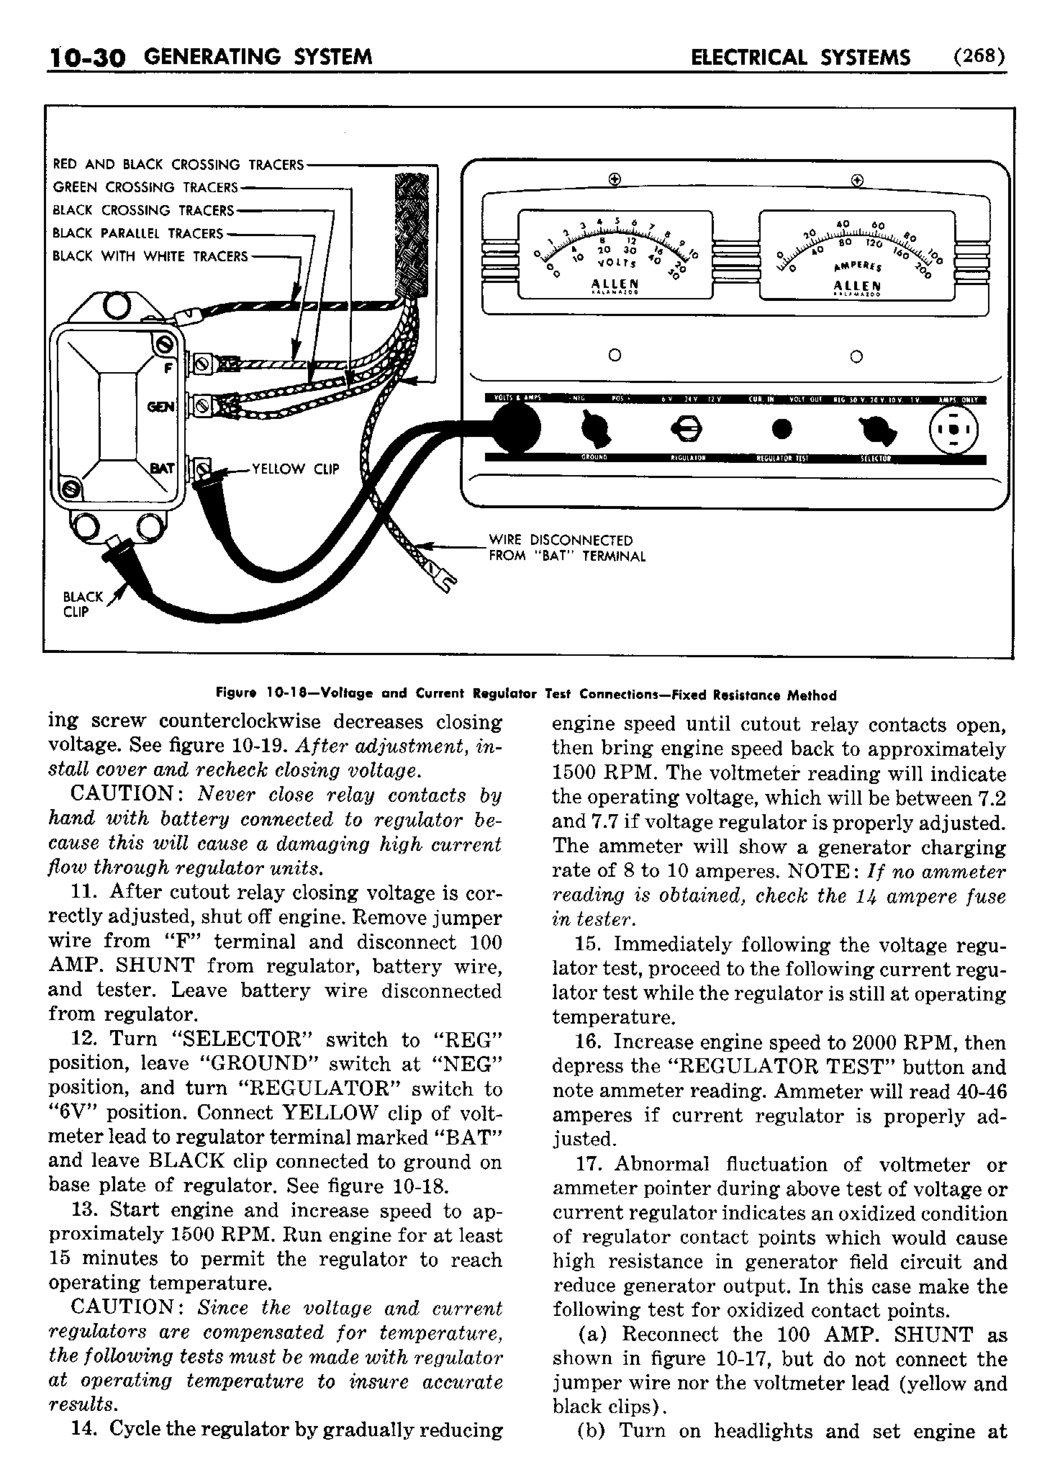 n_11 1950 Buick Shop Manual - Electrical Systems-030-030.jpg